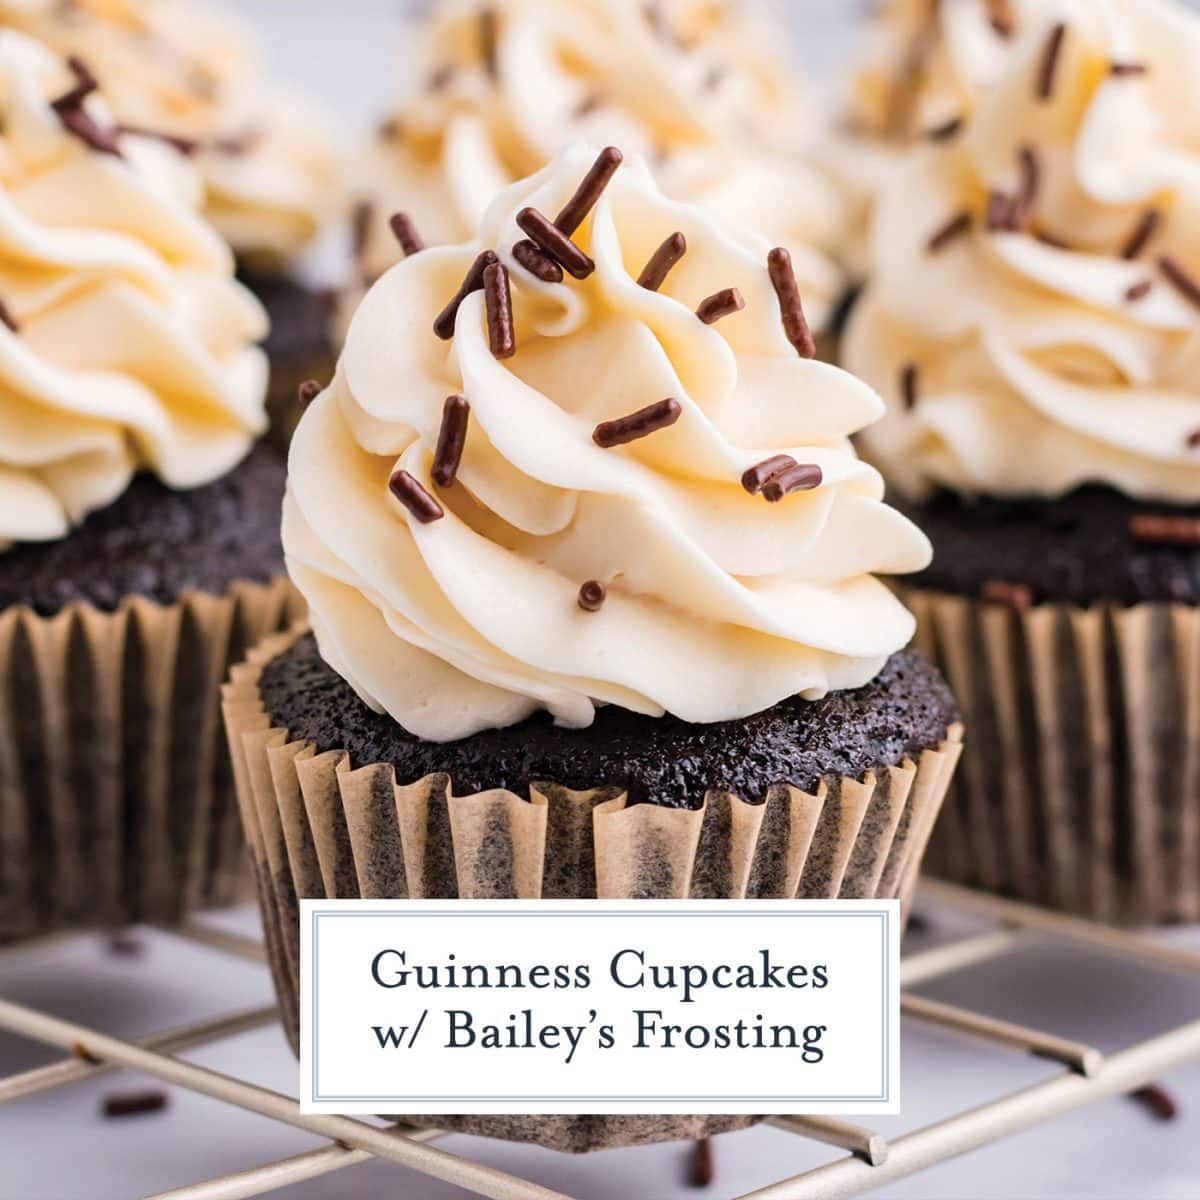 Boozy Chocolate Cupcakes with Baileys Buttercream Frosting - Bake Drizzle  Dust